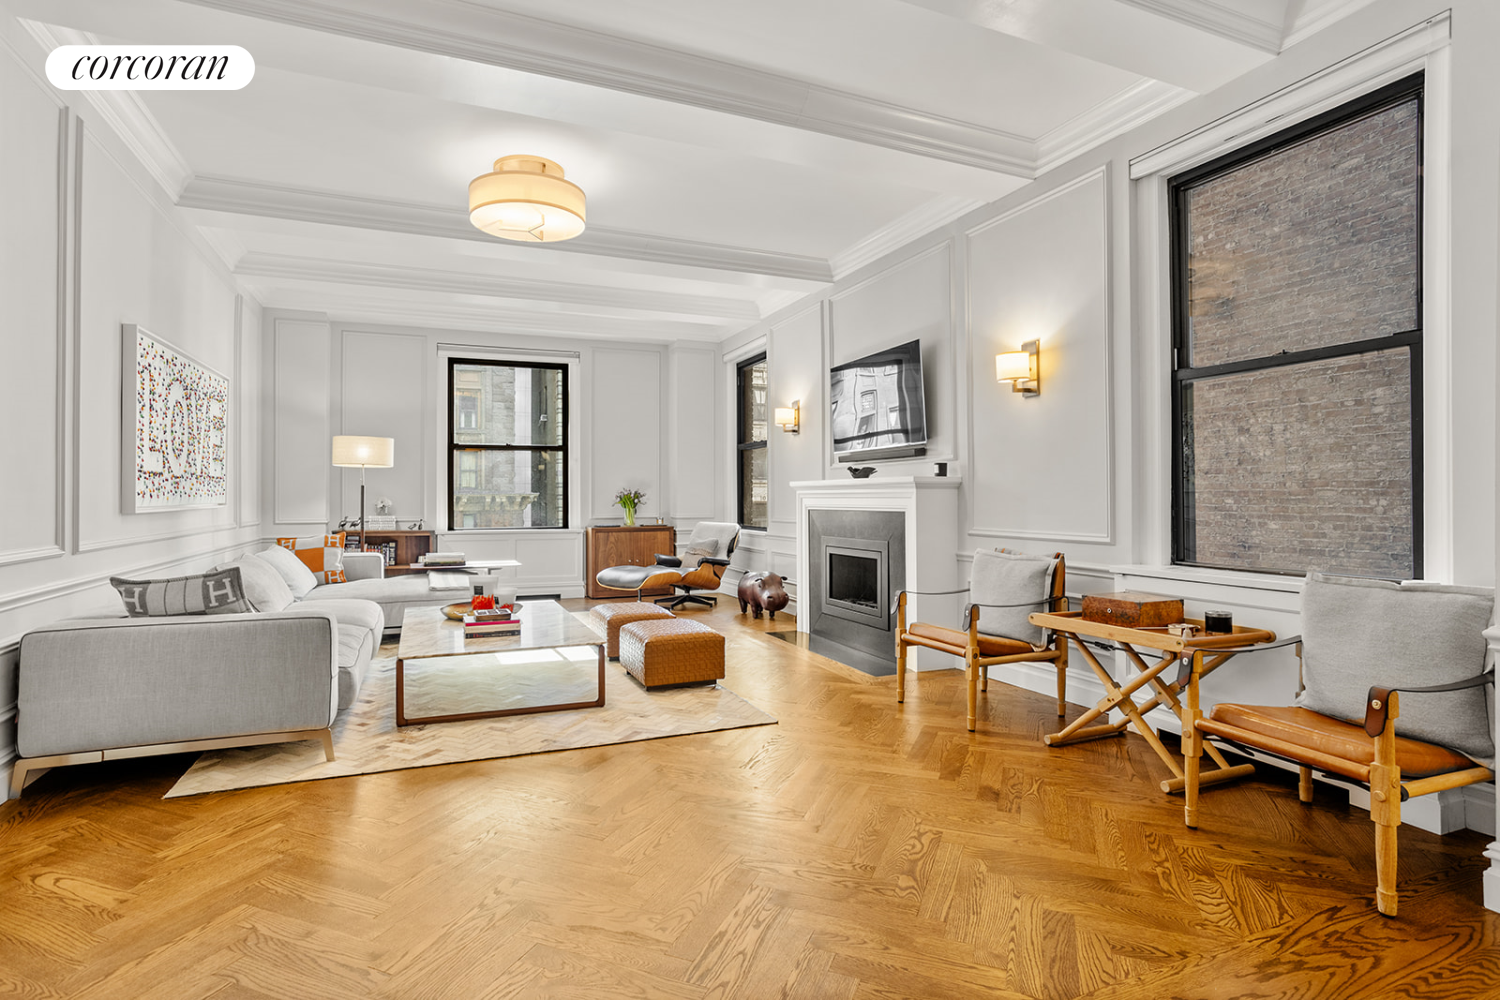 171 West 57th Street 9A, Central Park South, Midtown West, NYC - 3 Bedrooms  
3 Bathrooms  
6 Rooms - 